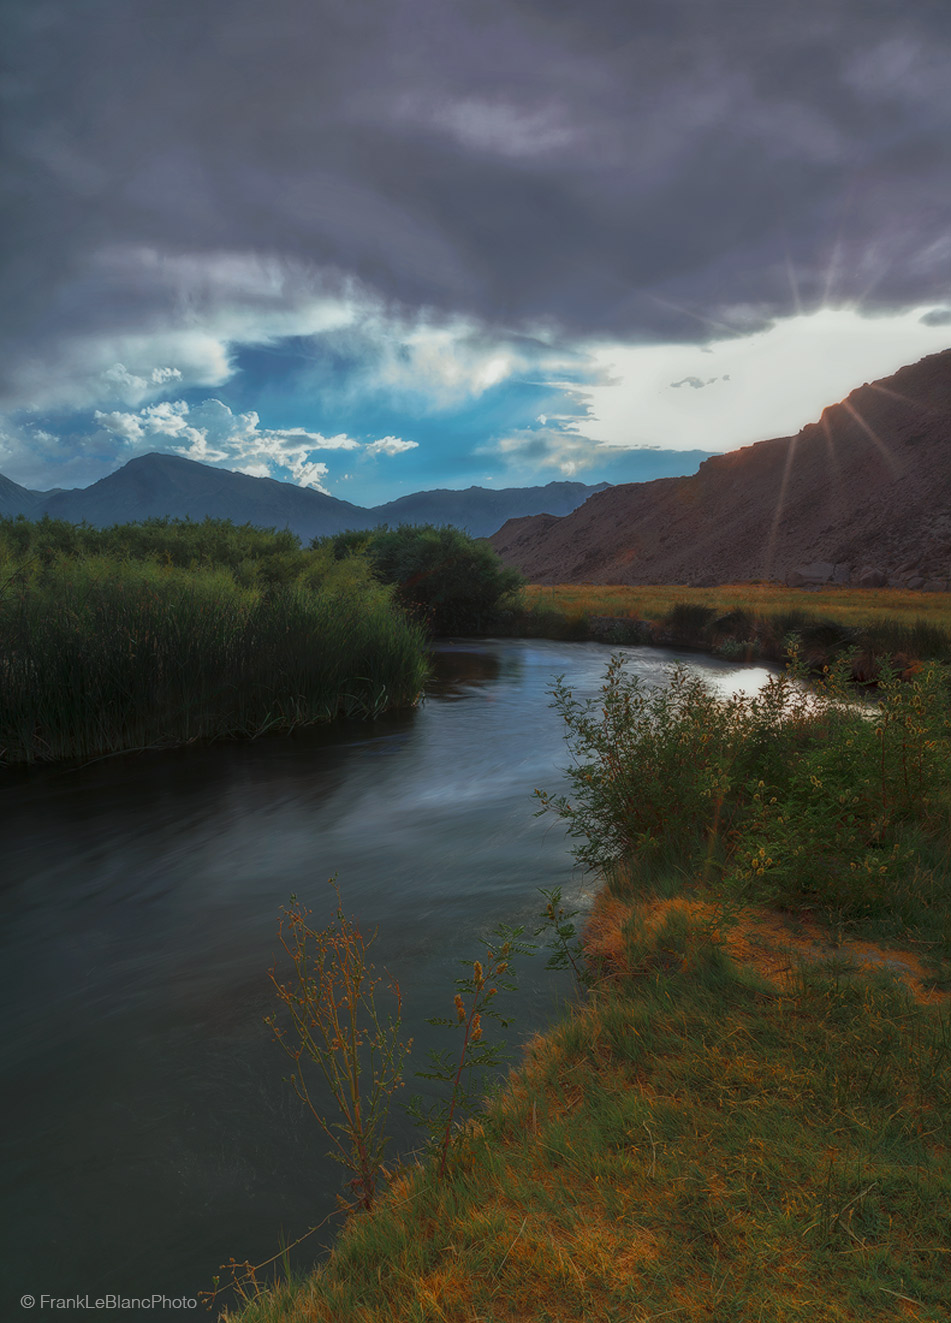 Summer is in full bloom along the Owens river. Reflections merge with the current as it swiftly moves on.